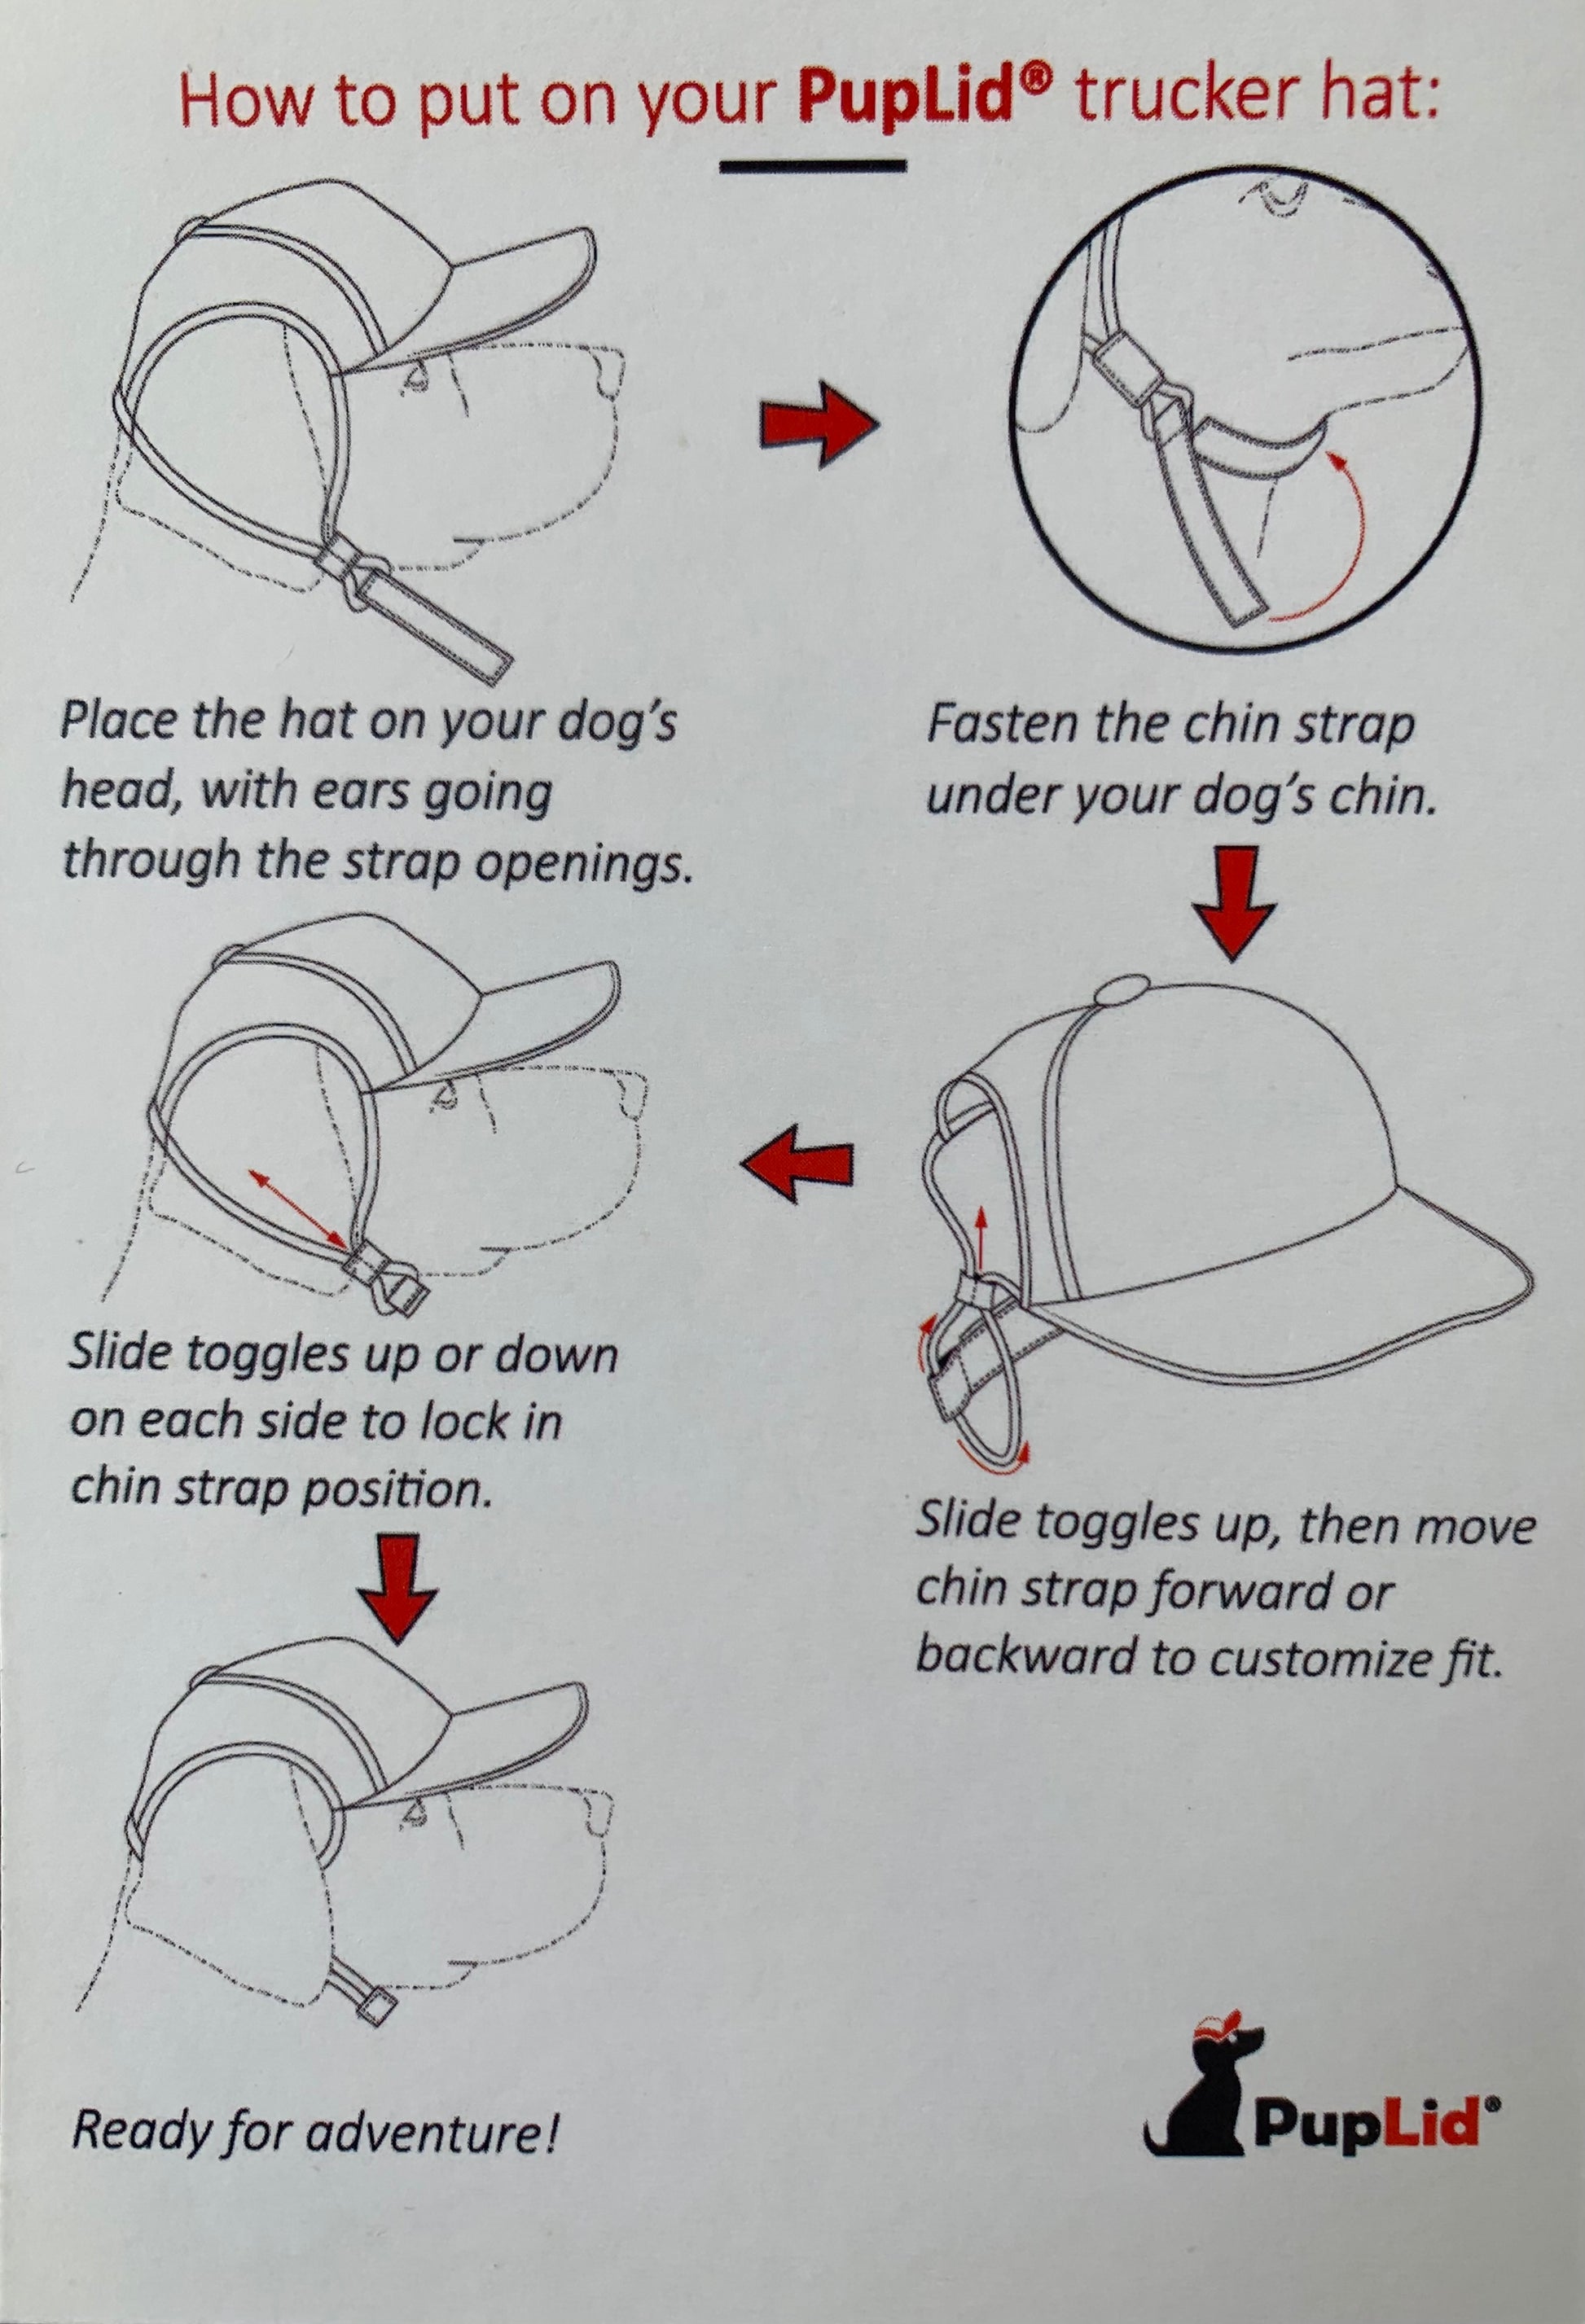 PupLid trucker hat instructions for how to put hat on dogs